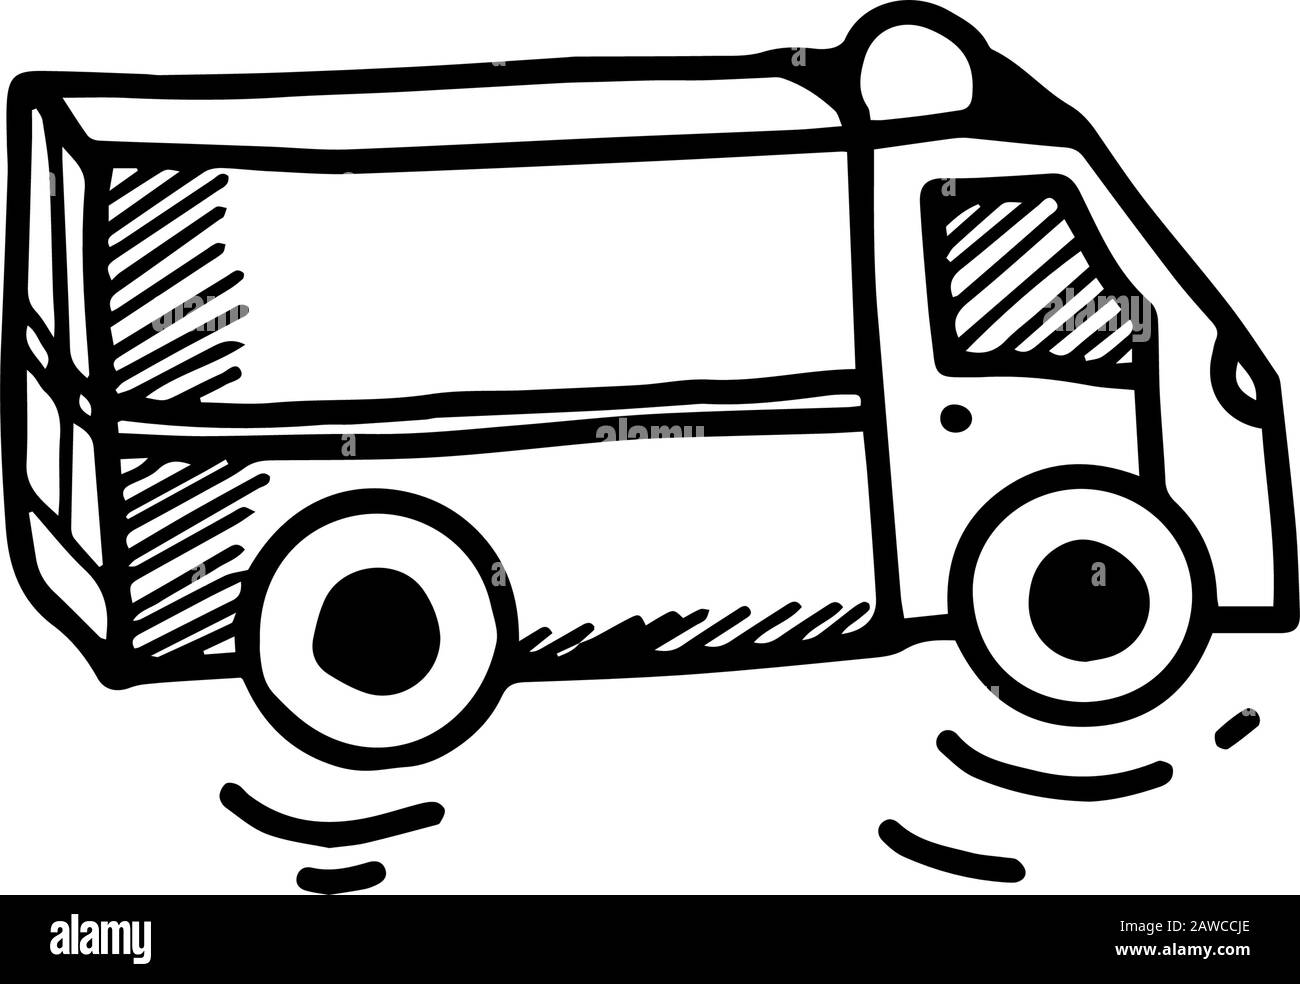 Ambulance or truck in hand drawn doodle style isolated on white background. Vector stock outline illustration. Single. Sign element. Medical equipment Stock Vector